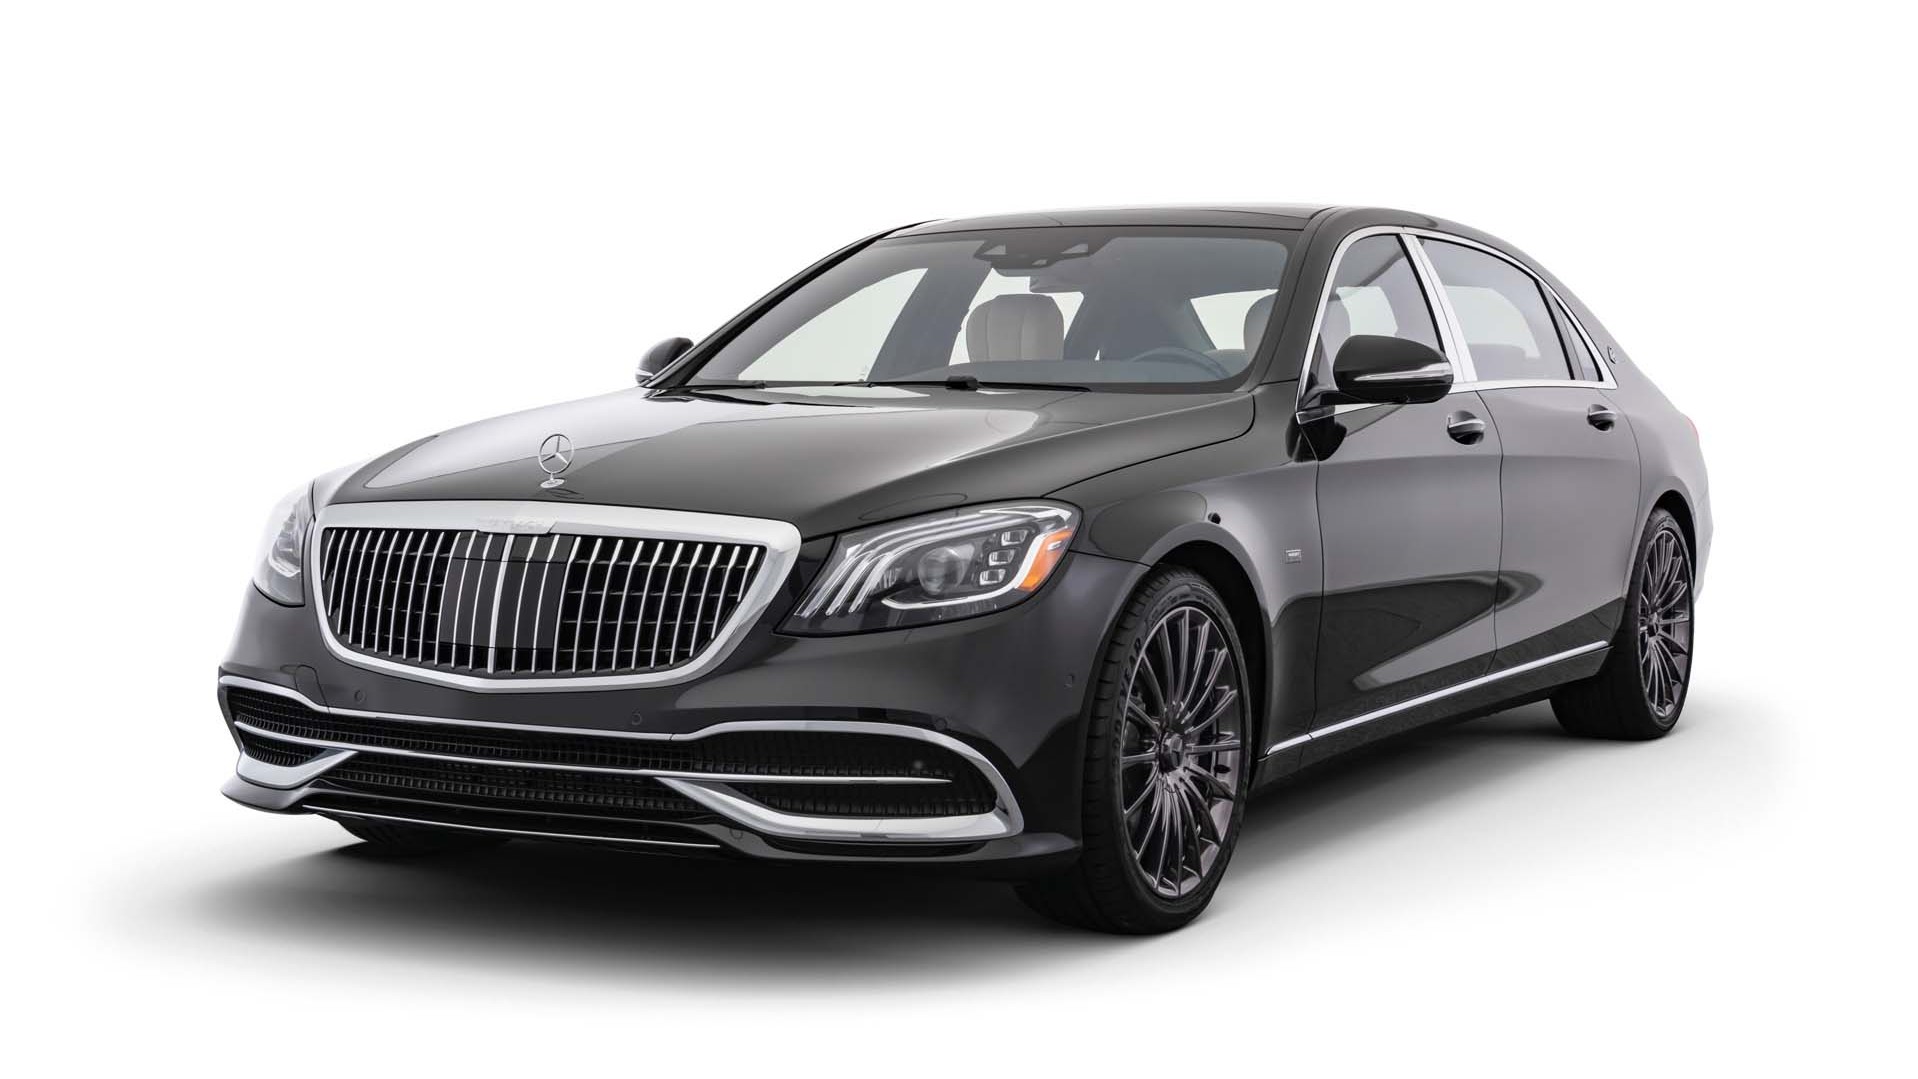 Mercedes-Benz Maybach S-Class 2022 Car Mileage, Engine, Price, Space, Safety and Features